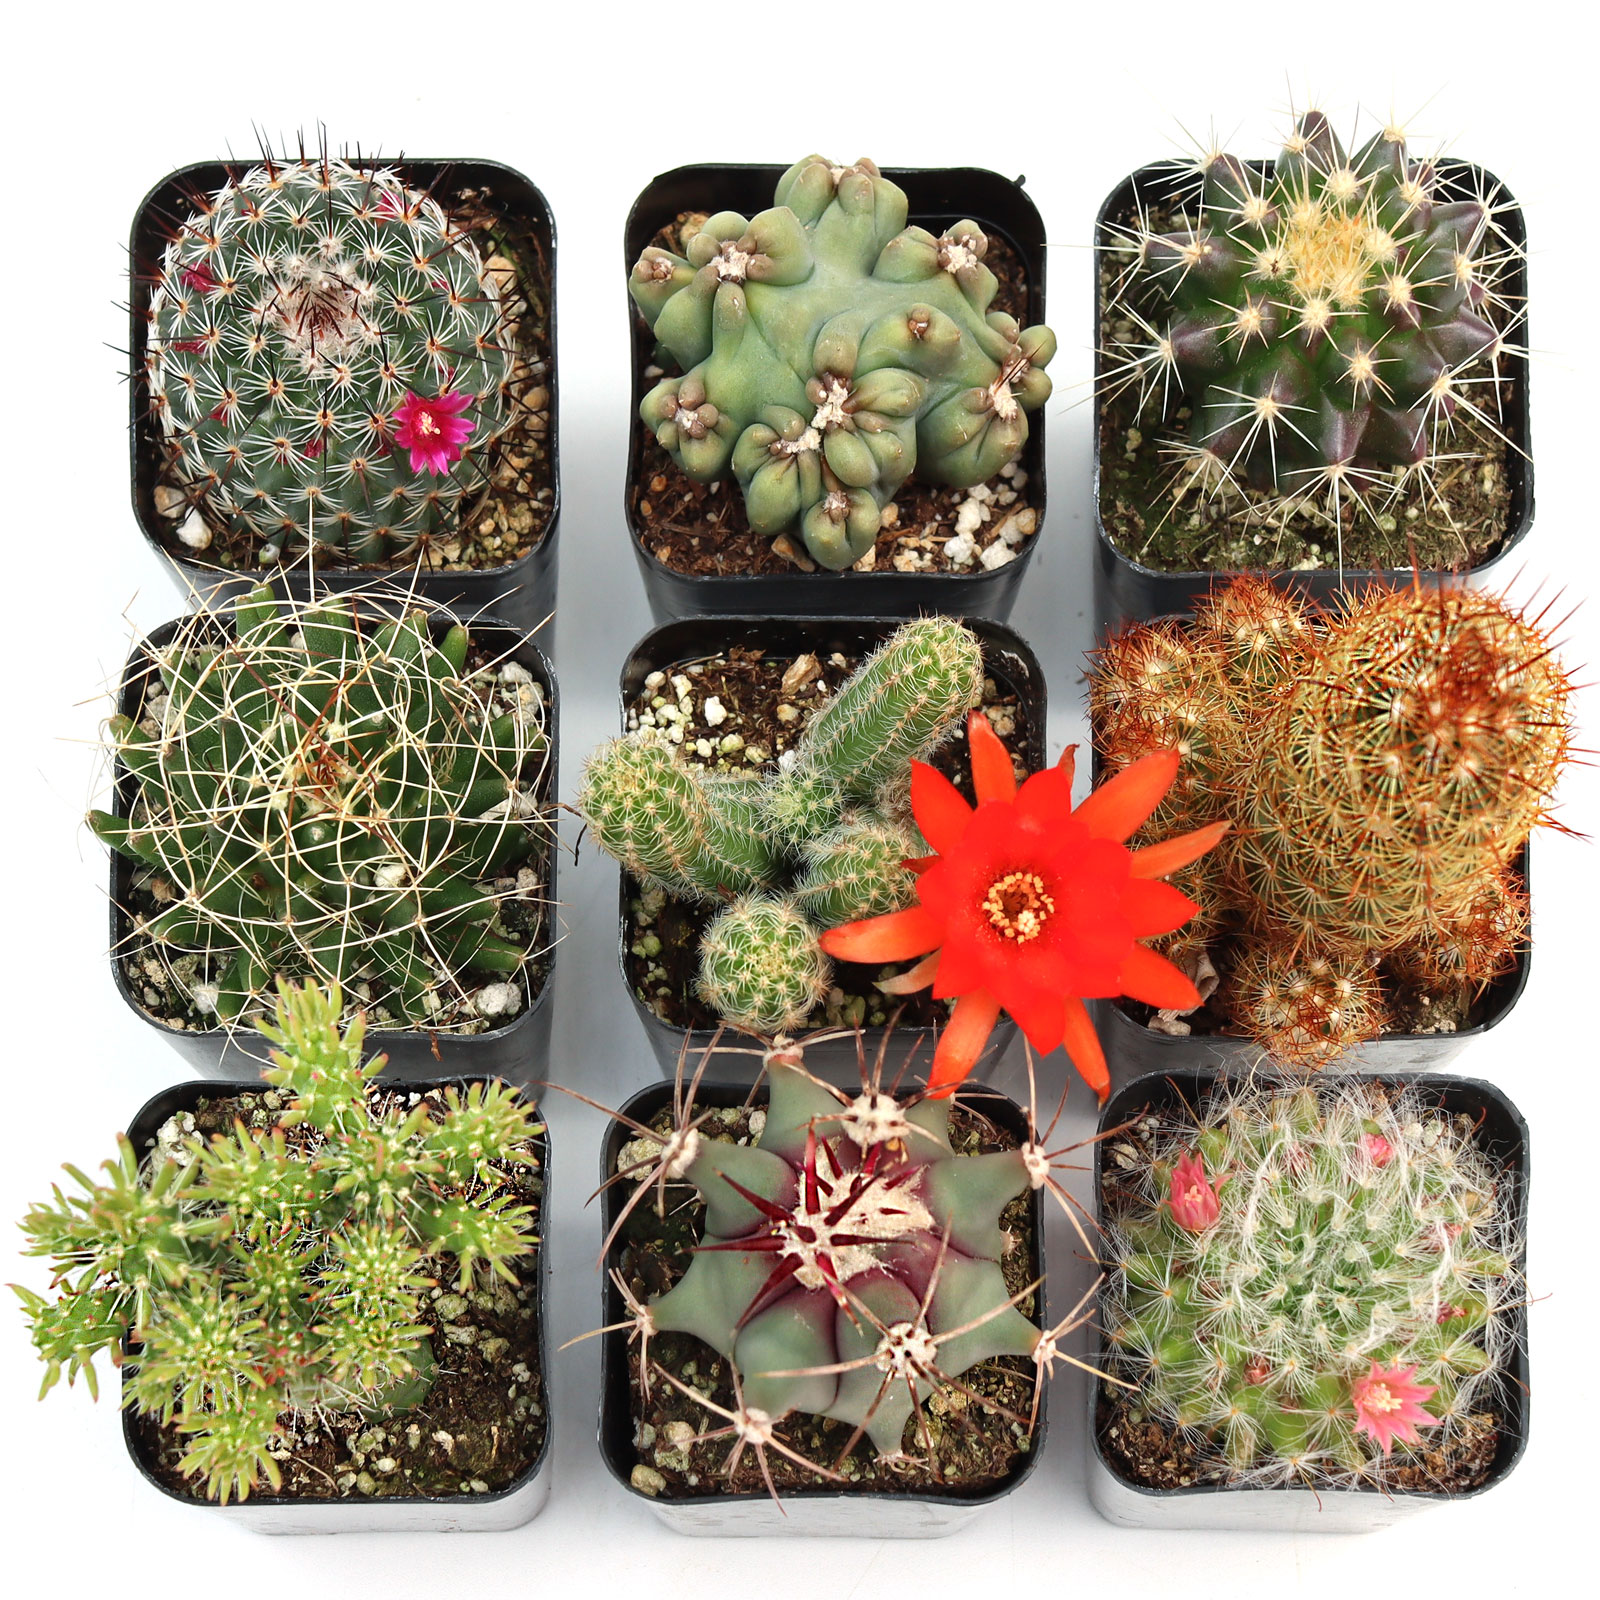 Is the set of 9 cacti what is pictured or random cacti?